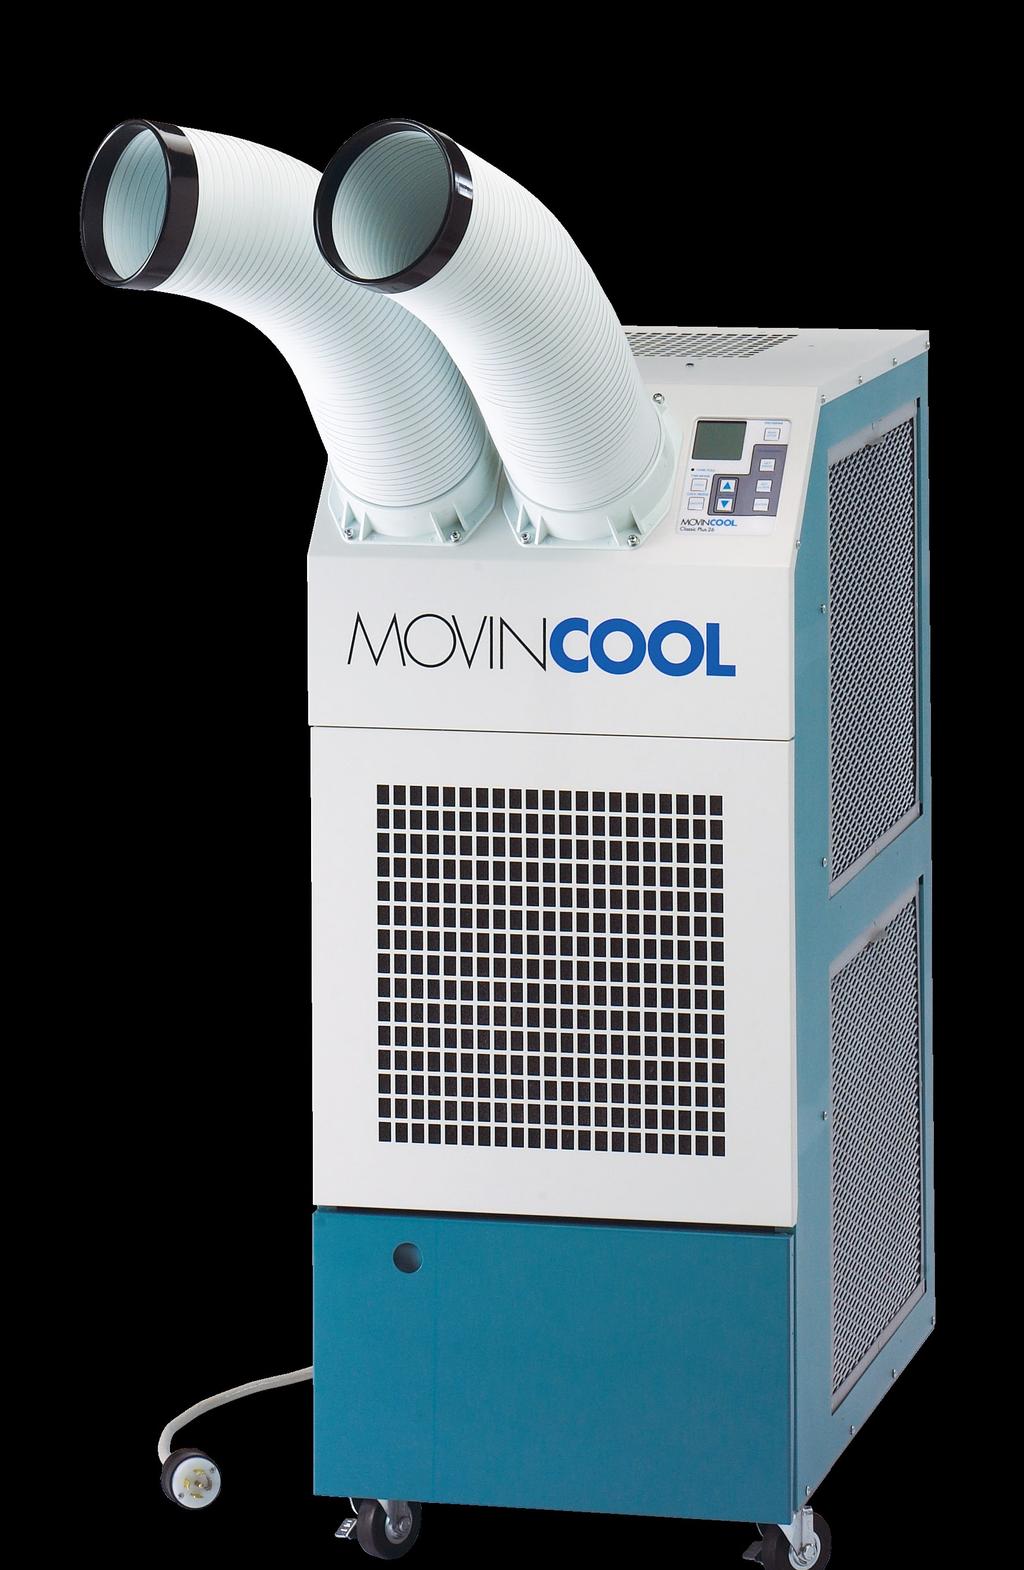 Classic Plus 26 The MovinCool Classic Plus 26 portable air conditioner has all the benefits of our proven Classic Series, PLUS new features designed to increase performance and control.